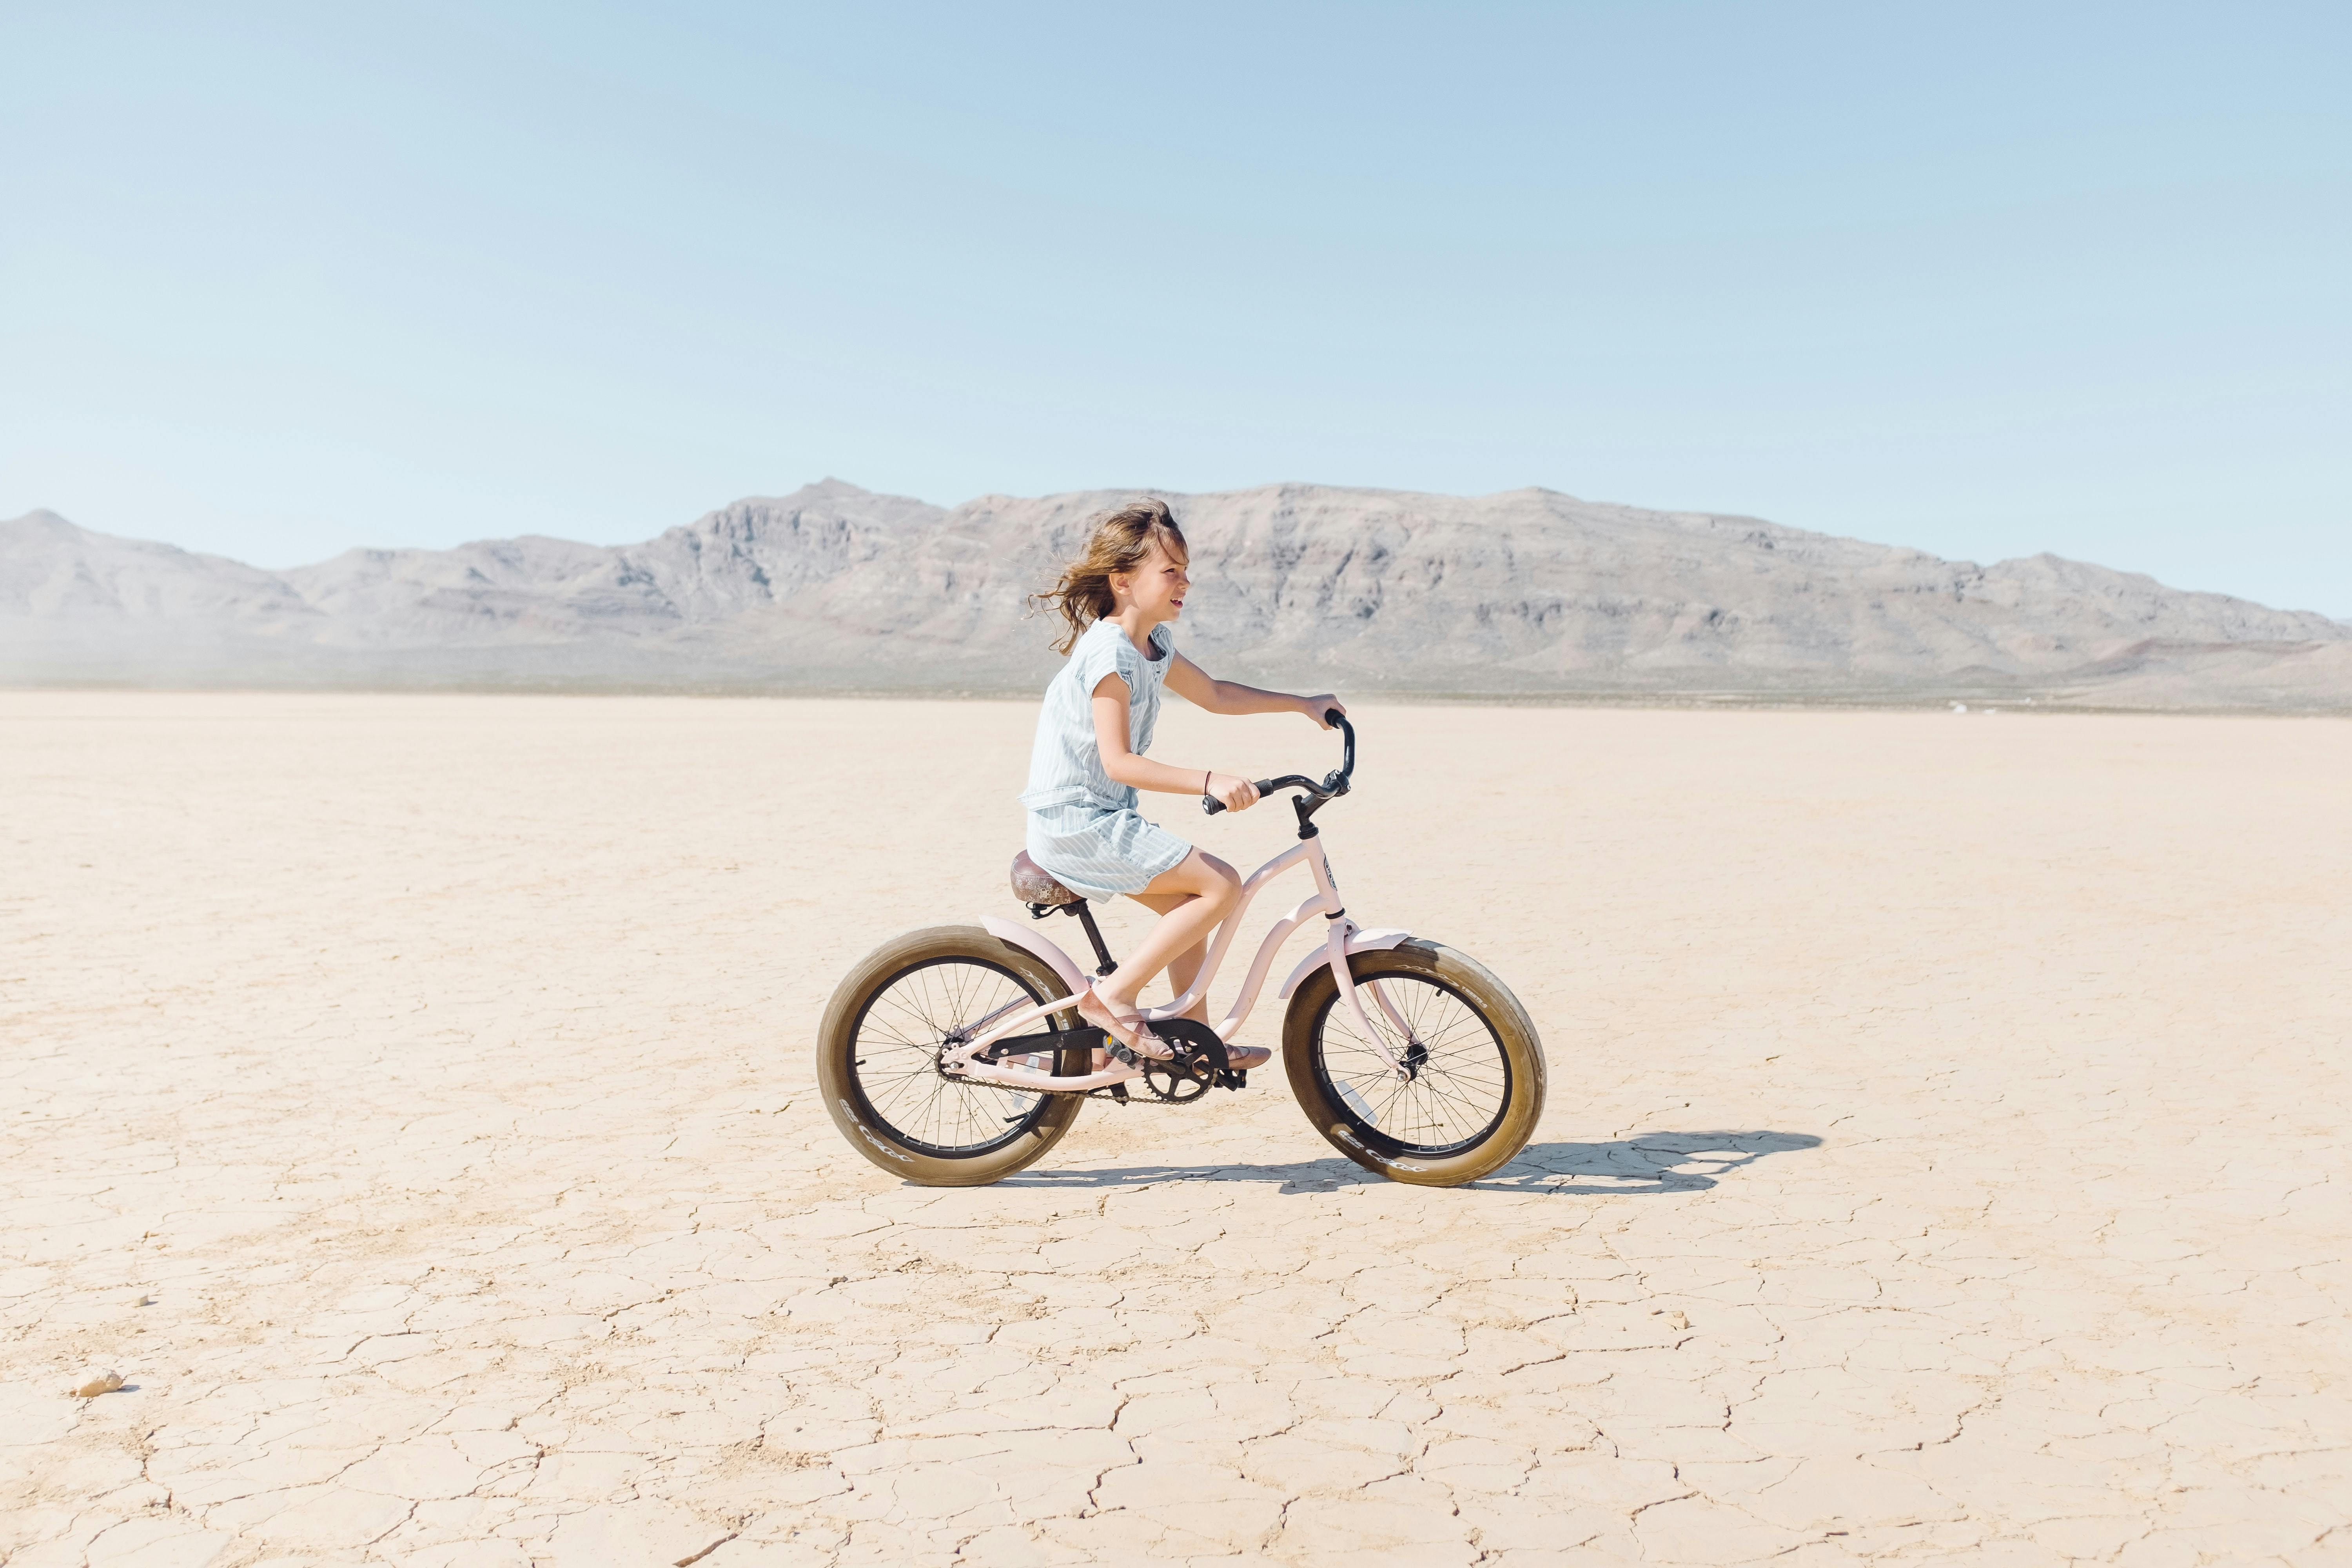 A young girl riding her bike across cracked desert earth.